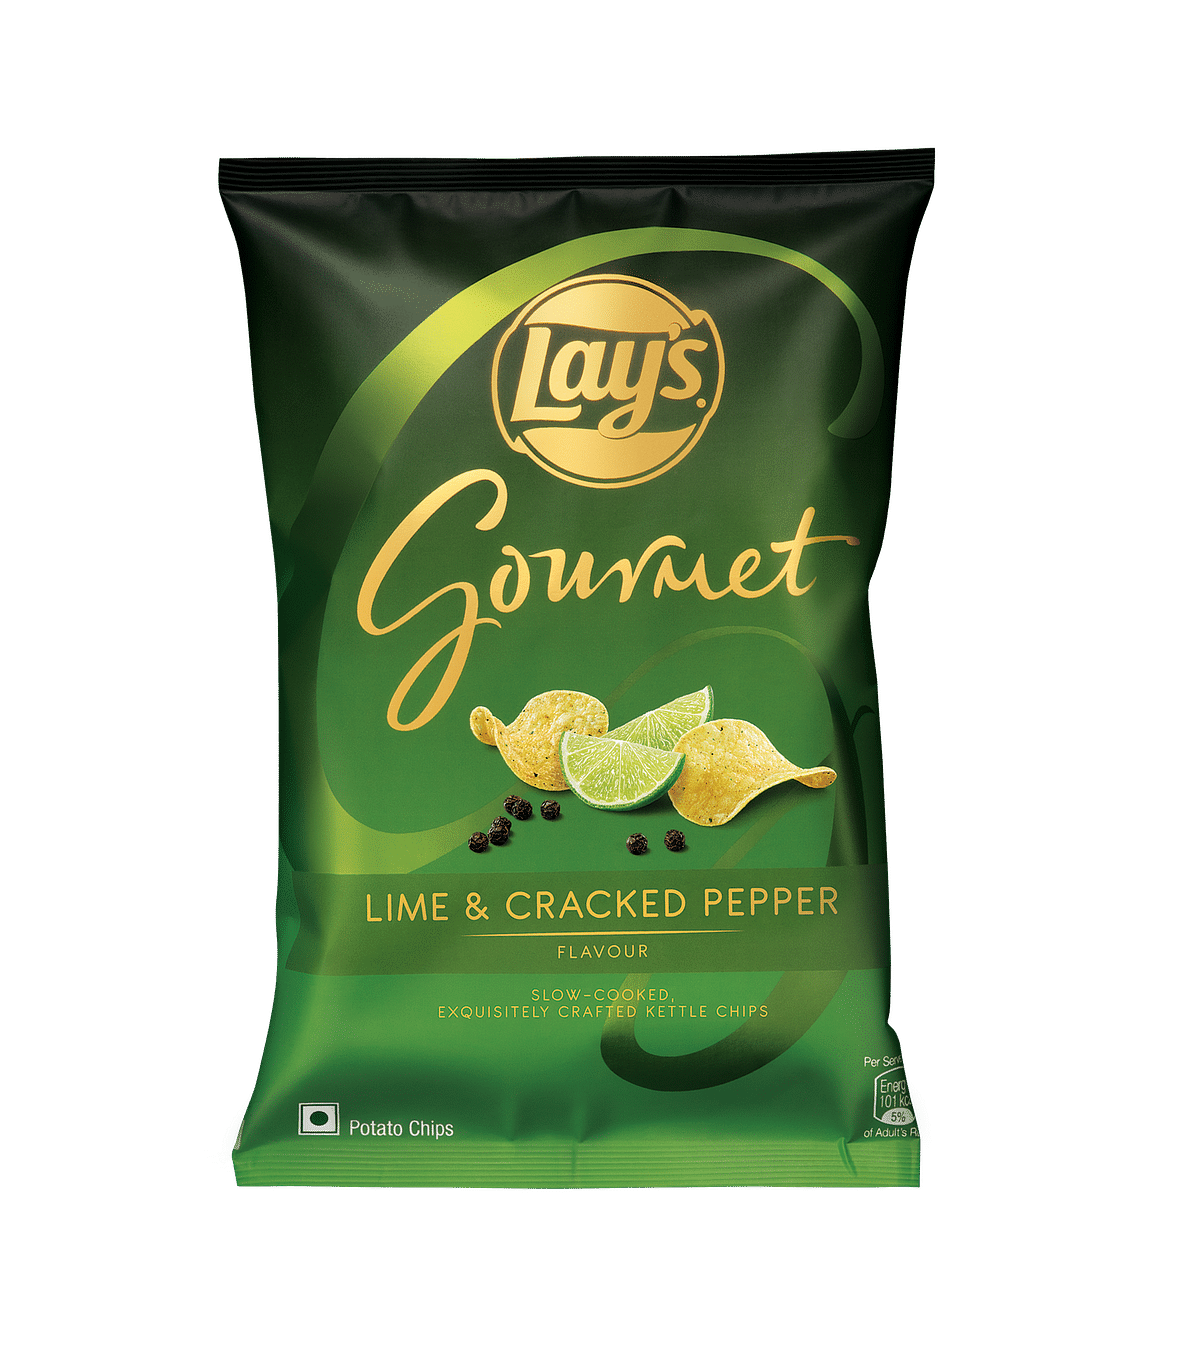 Gourmet is the flavour of the season for Lay's chips